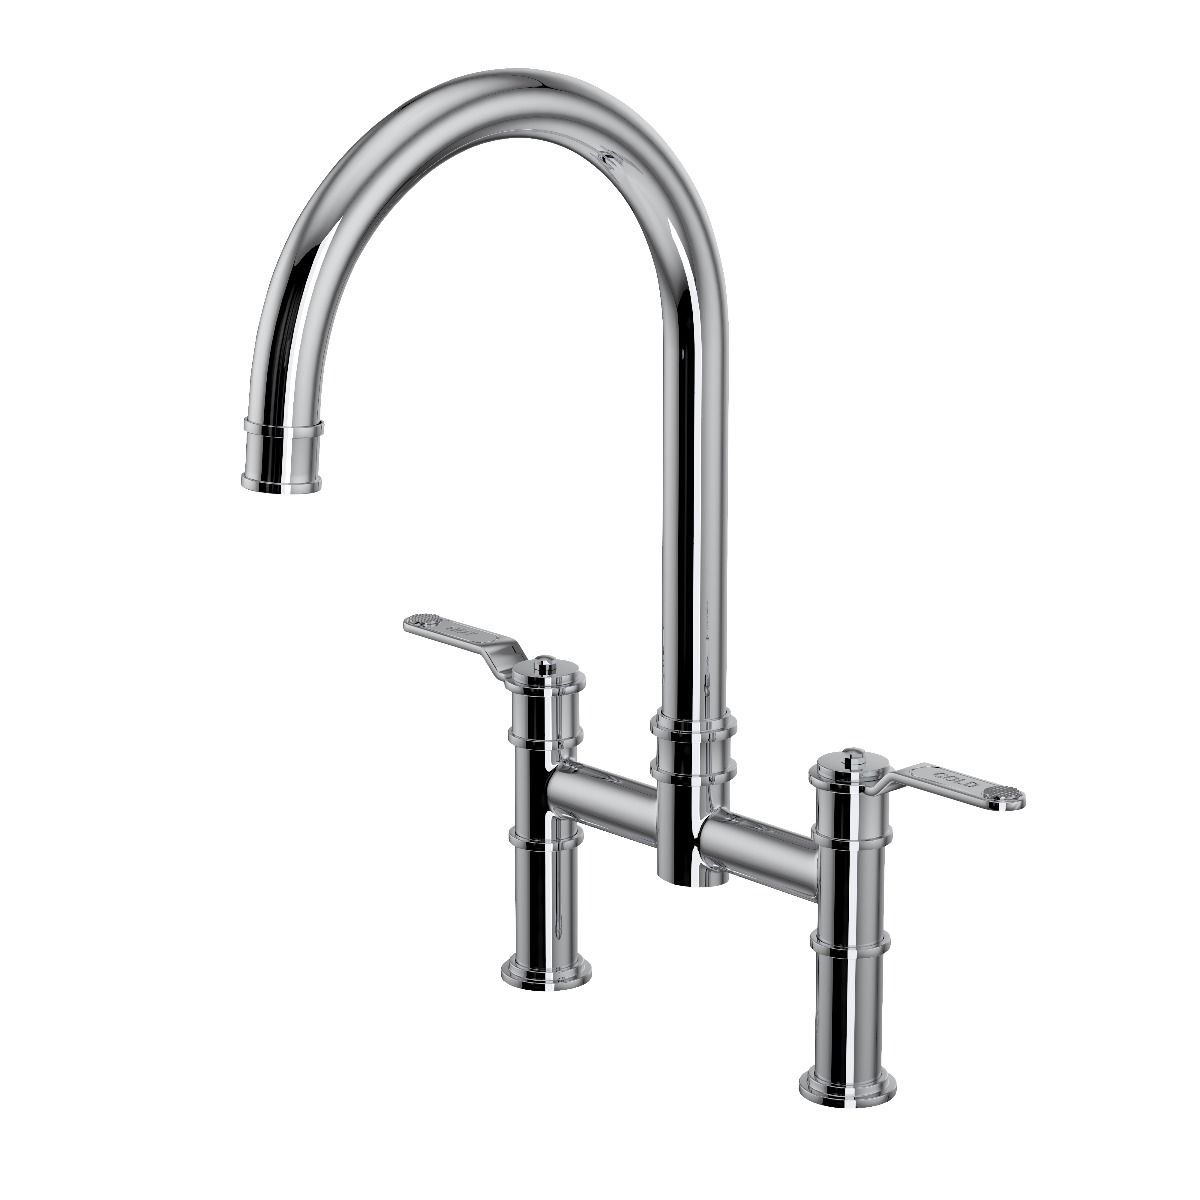 Armstrong Bridge Mixer Tap in Polished Chrome with Textured Handle – Perrin & Rowe